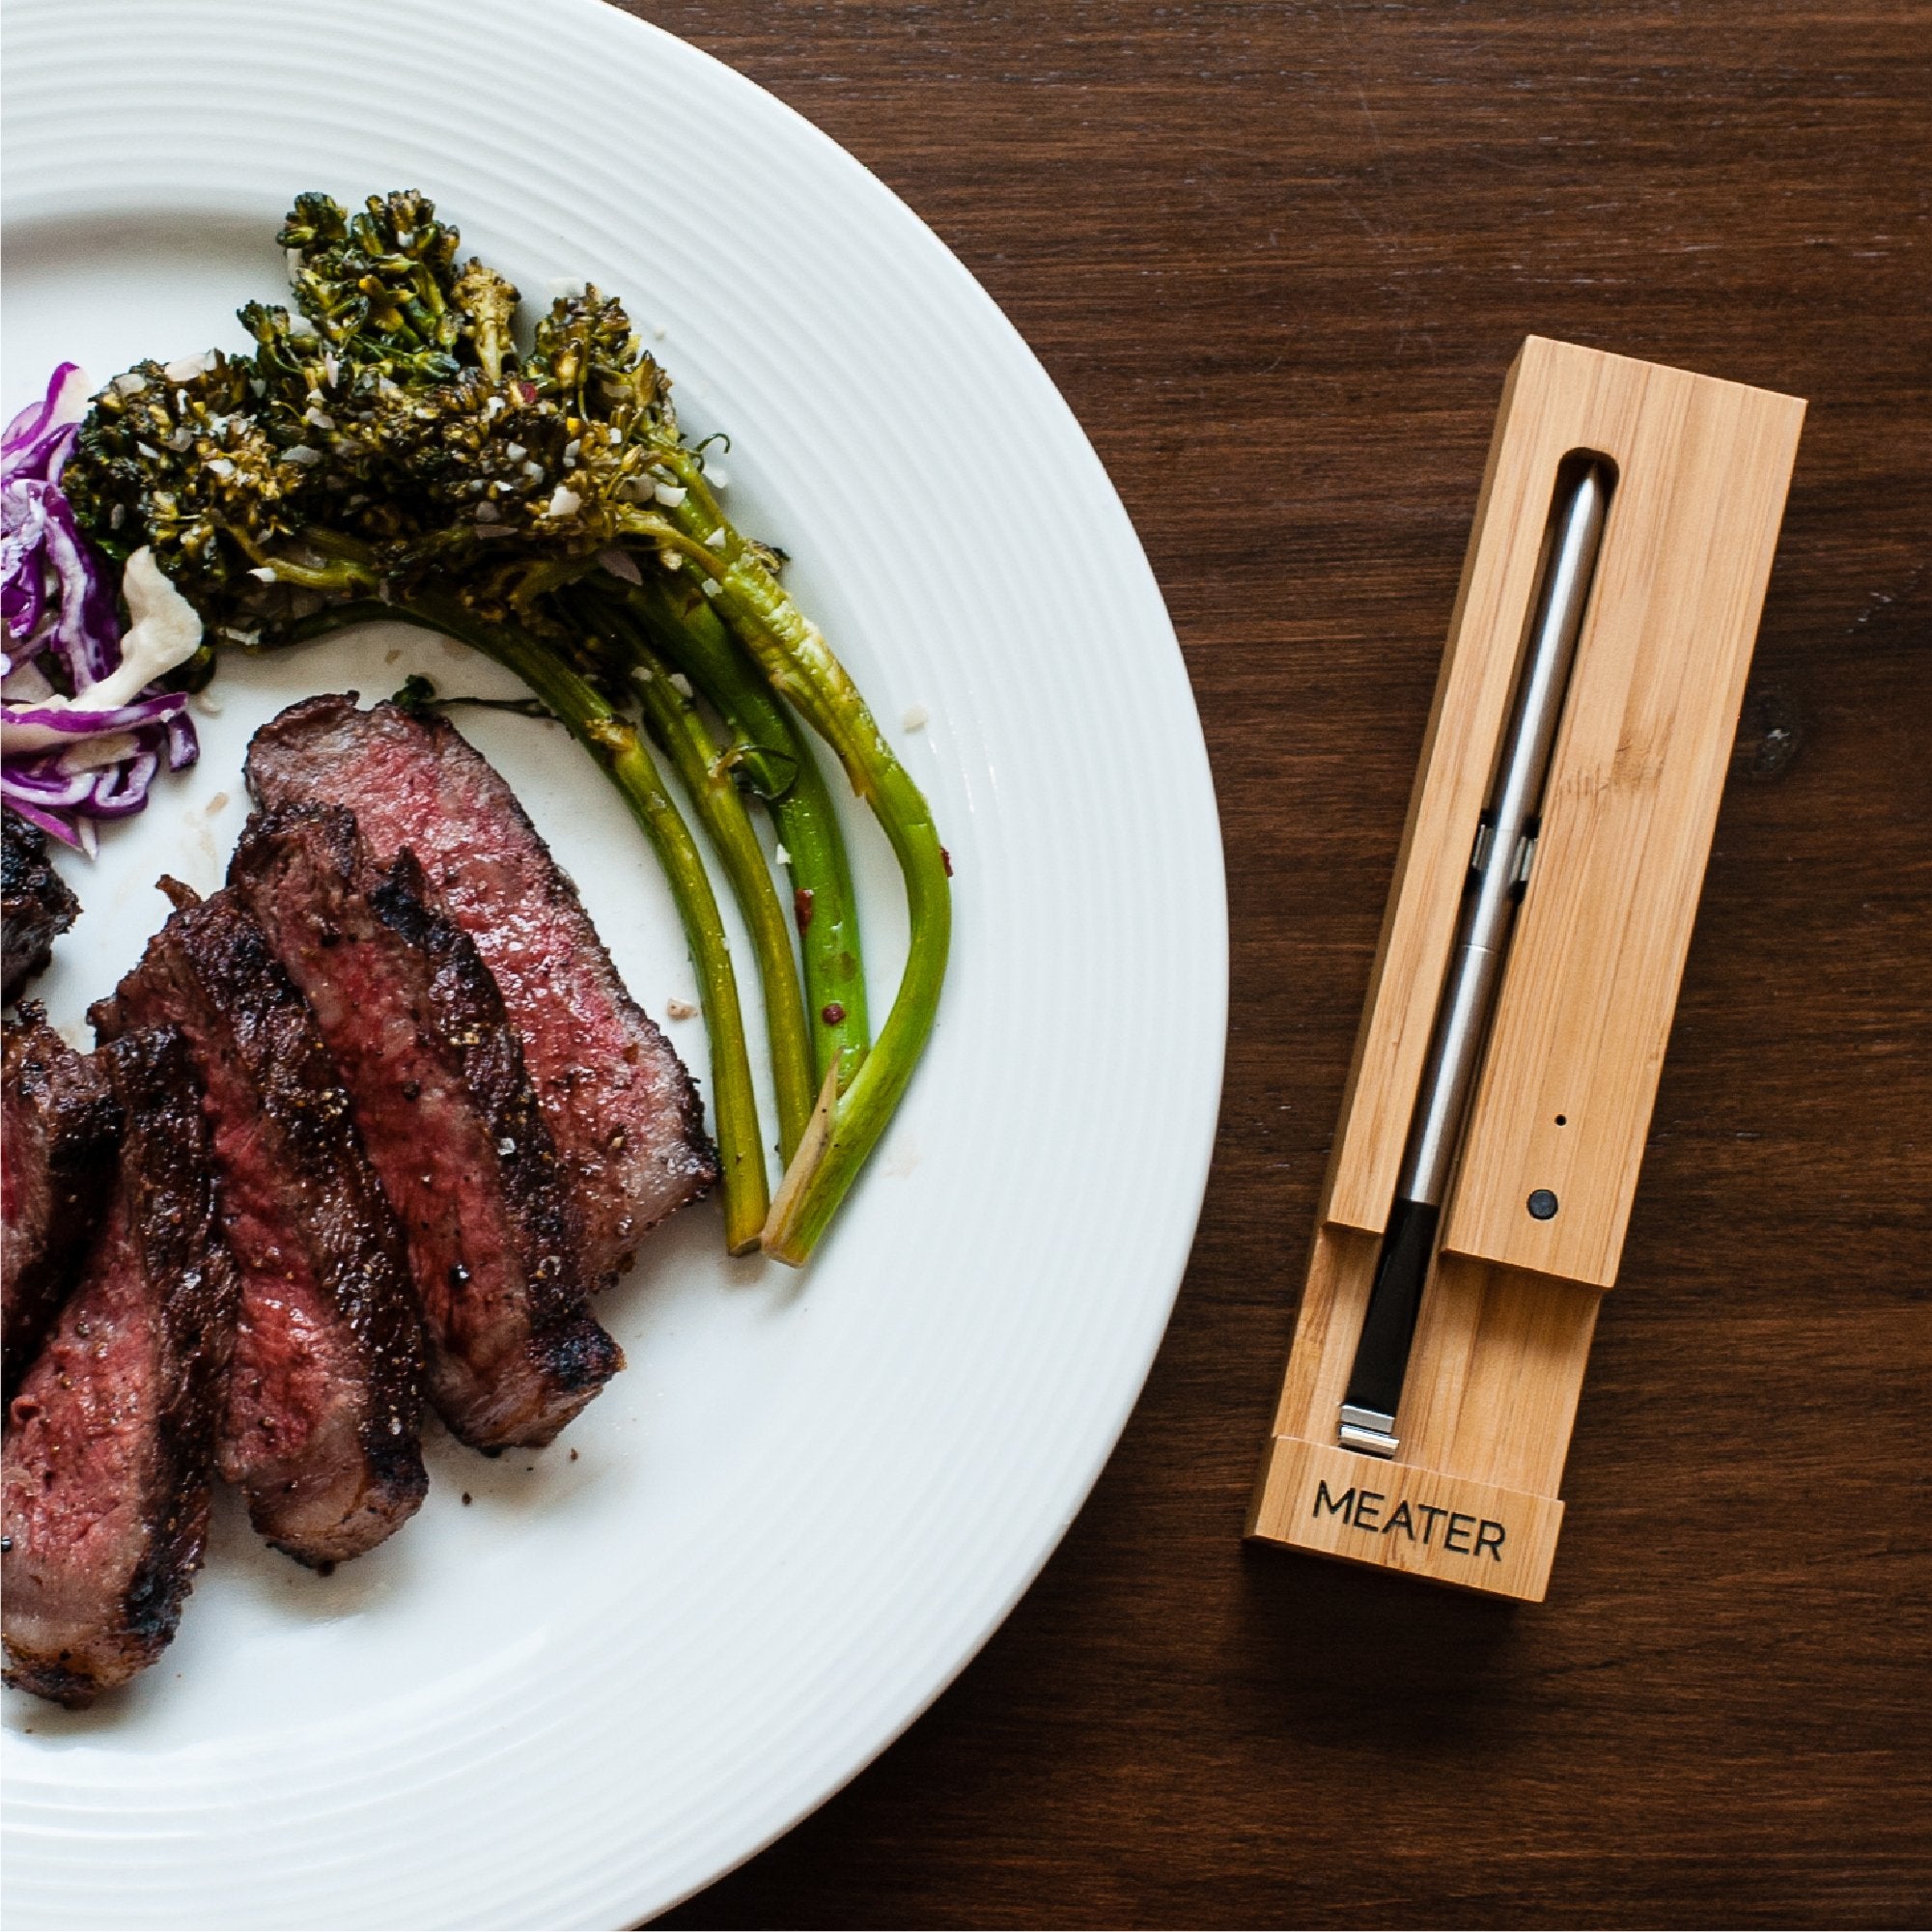 MEATER: The First Truly Wireless Smart Meat Thermometer by Apption Labs —  Kickstarter